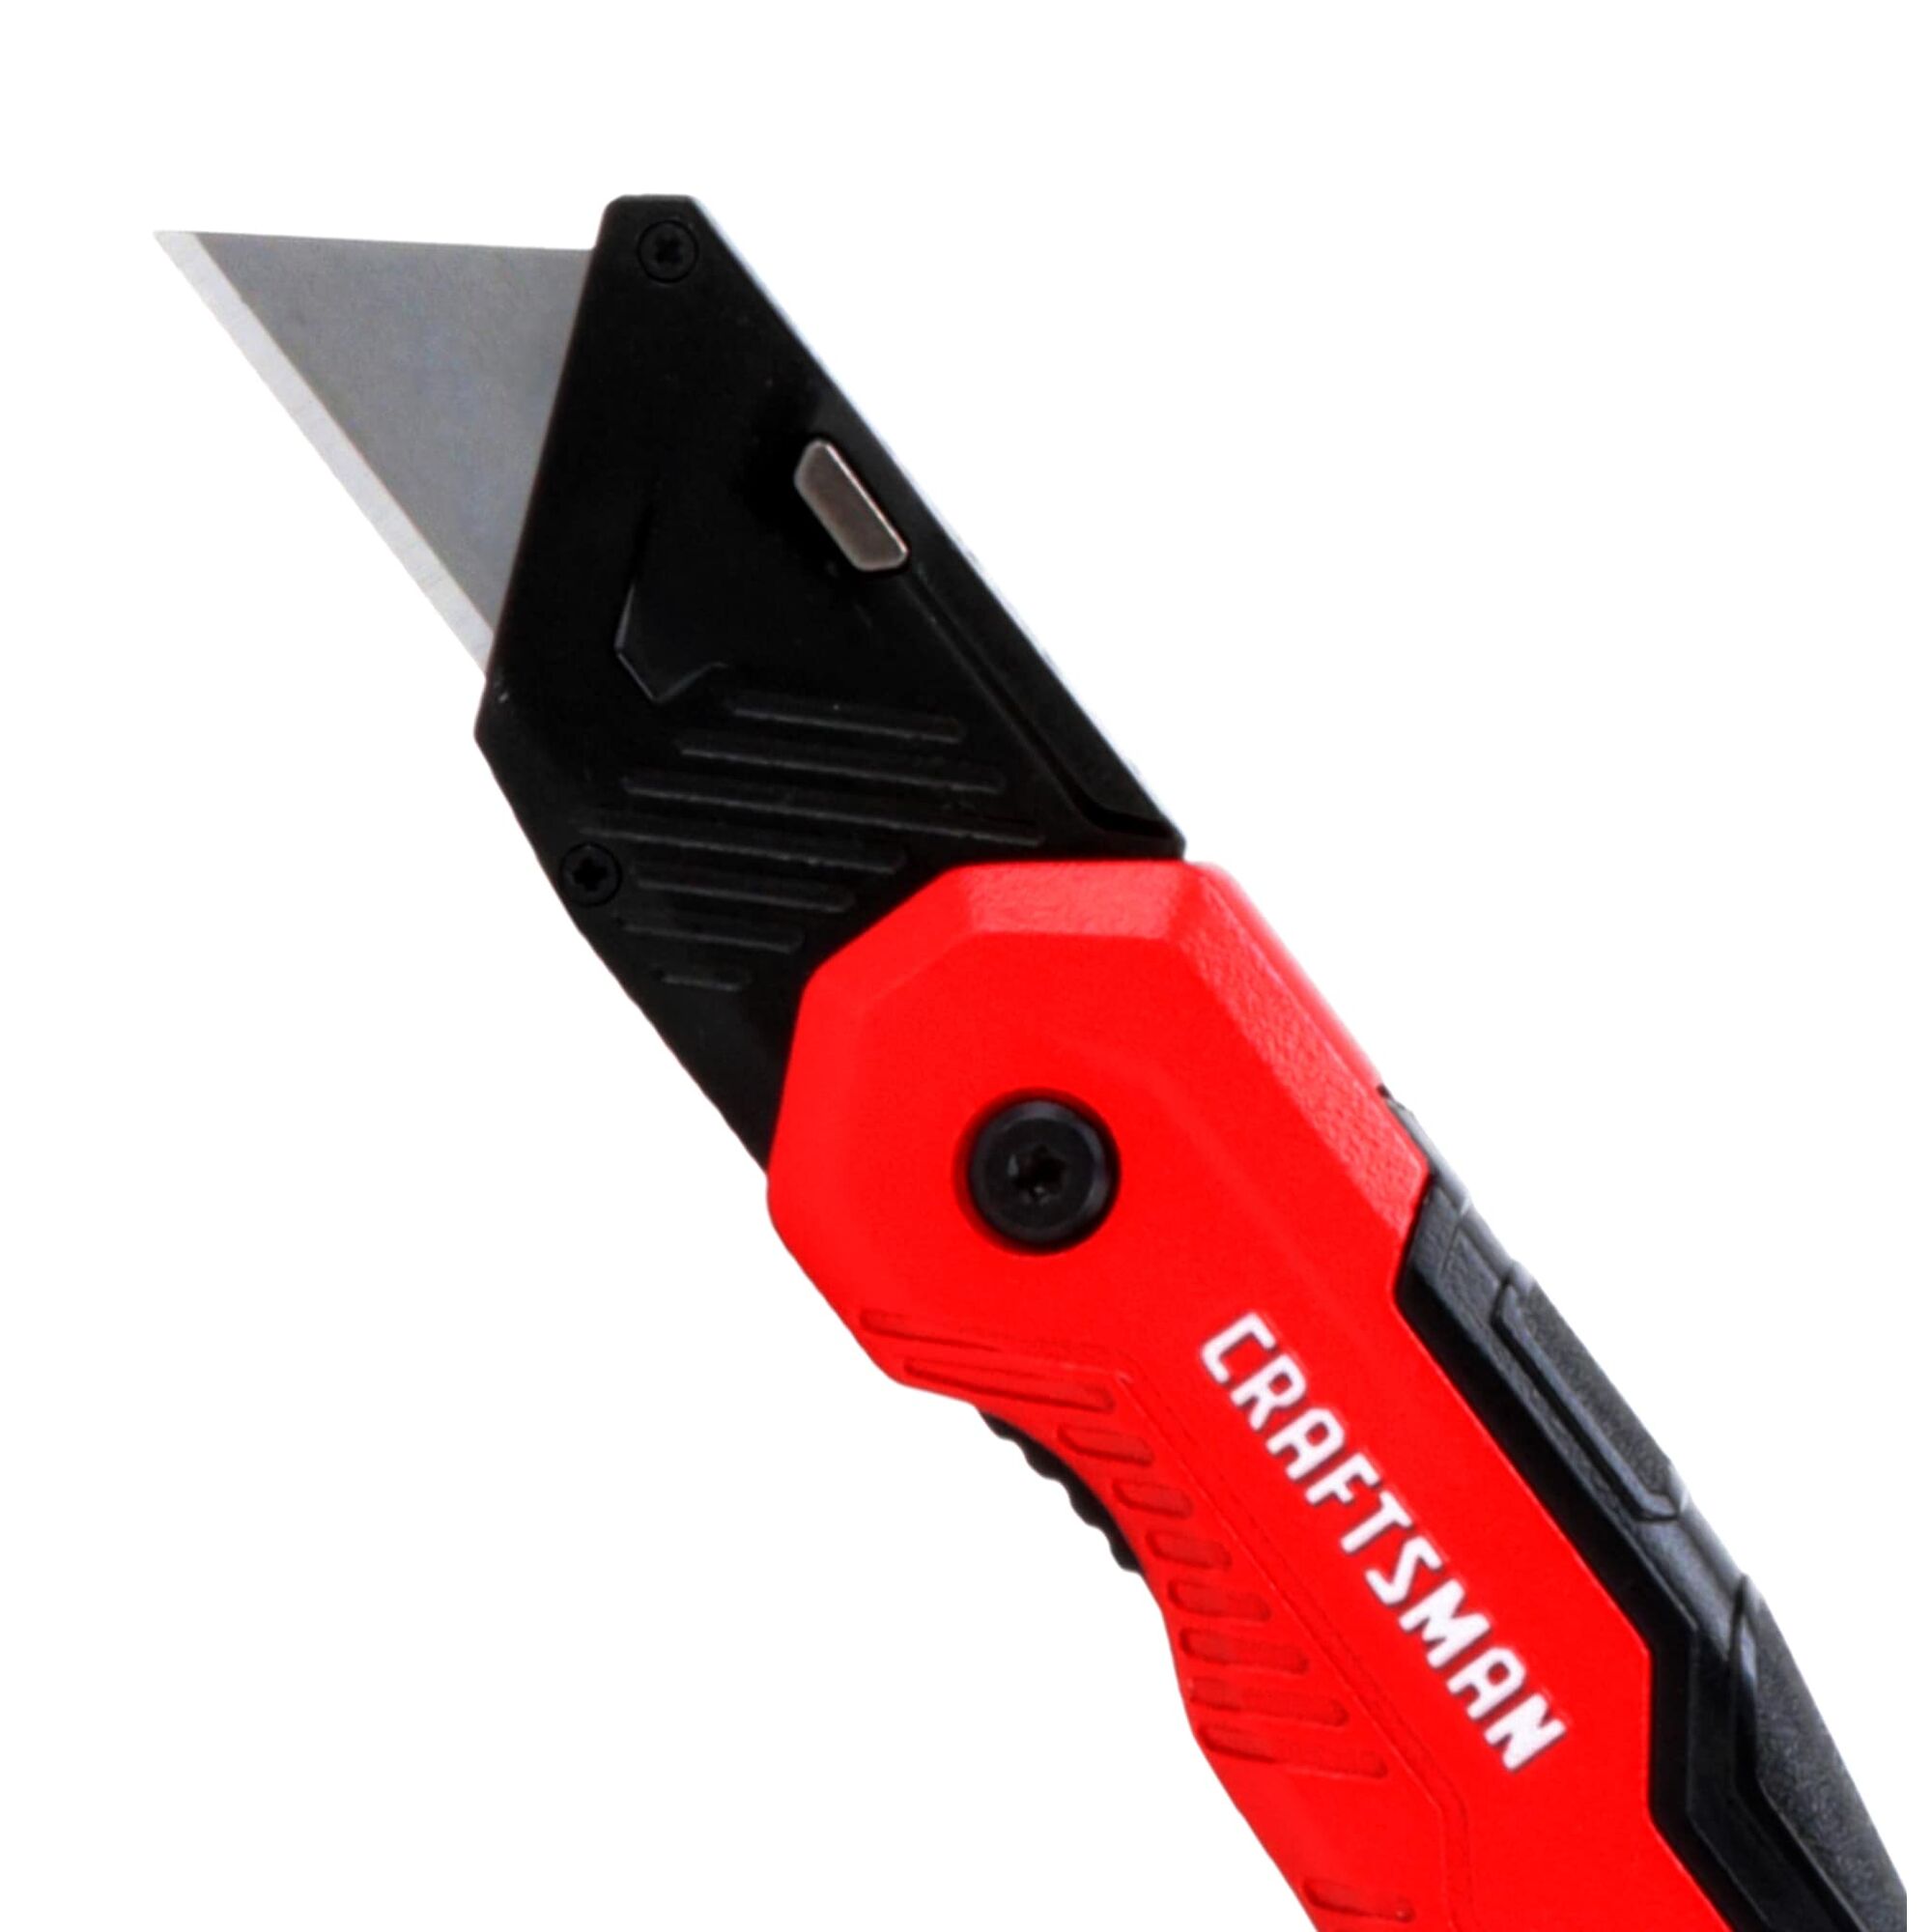 View of CRAFTSMAN Knives & Blades: Knives: Utility highlighting product features